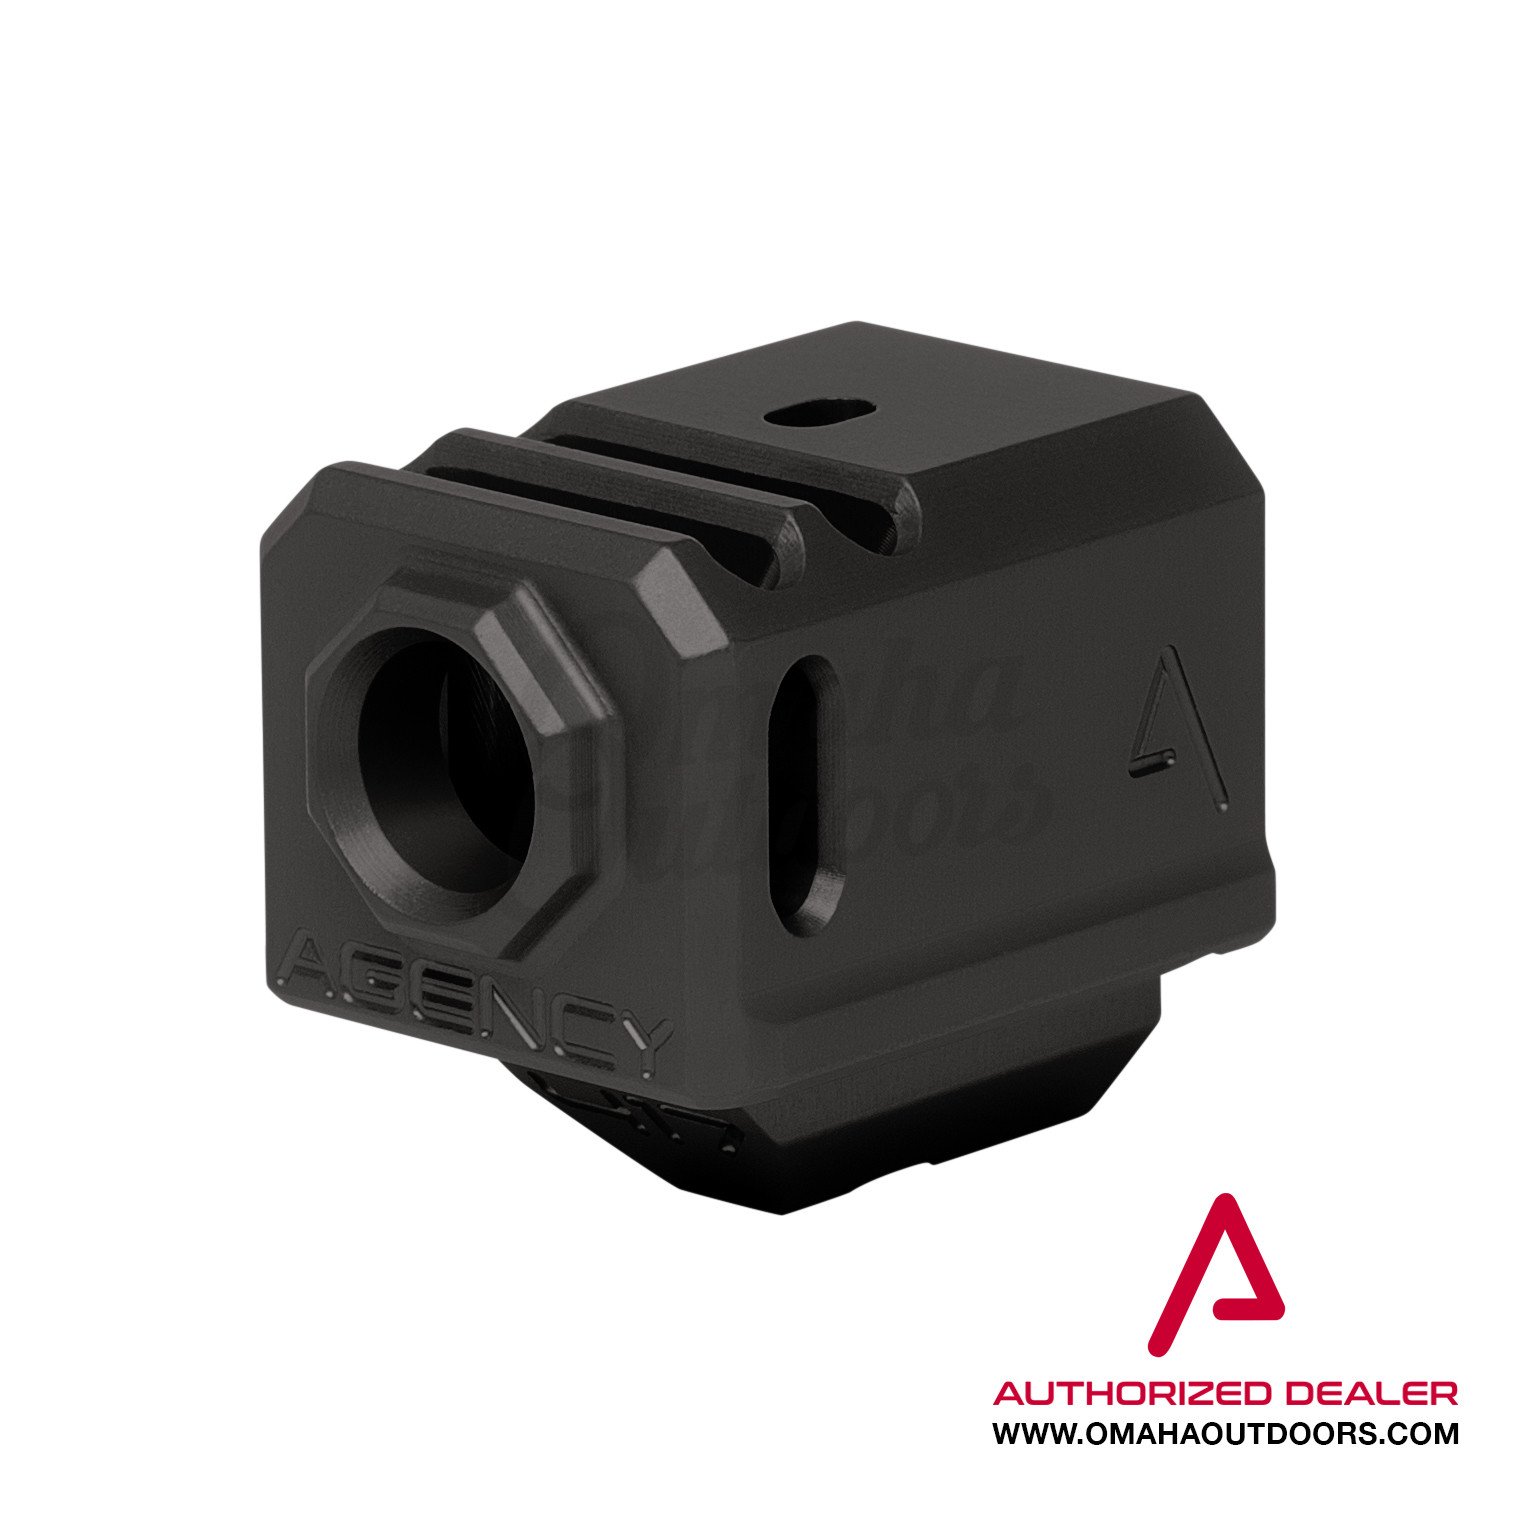 Agency Arms 417 Dual Port Compensator For Glock 17 19 Gen 3 1 2x28 Omaha Outdoors